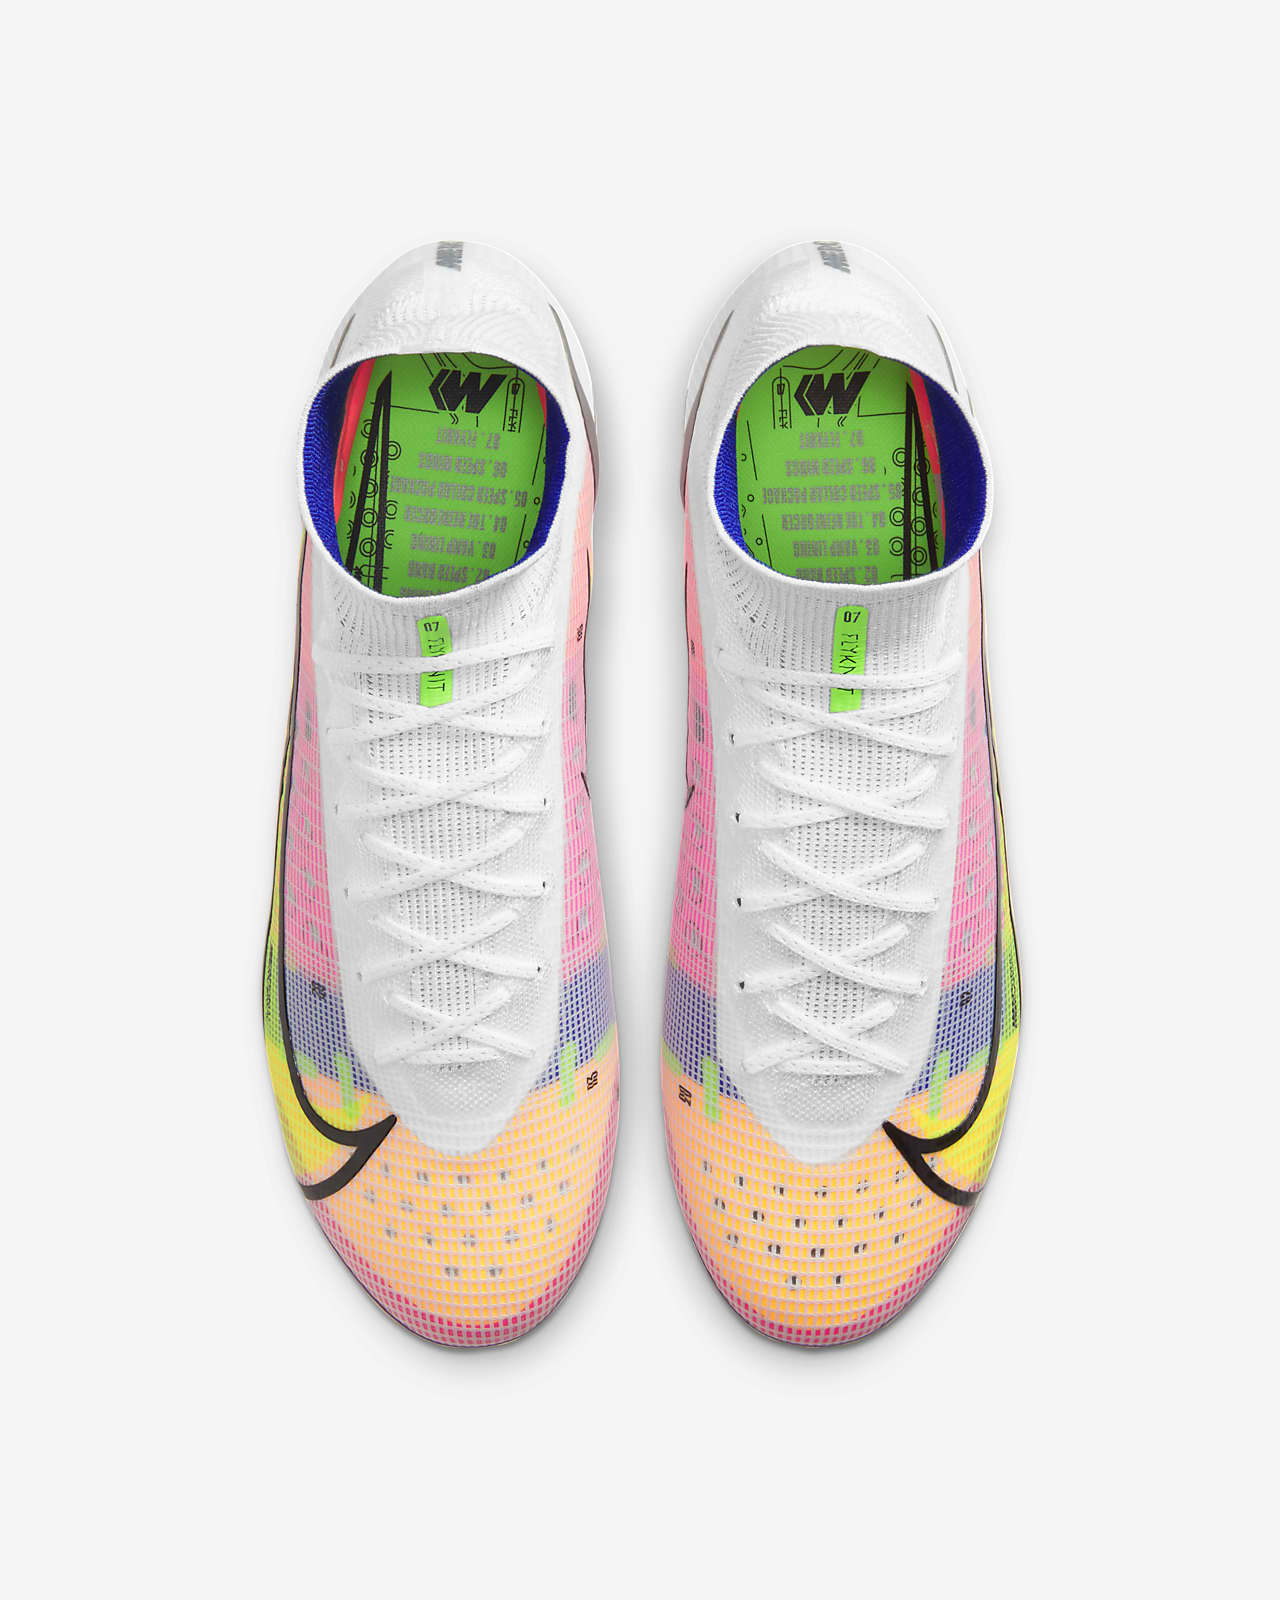 nike mercurial superfly all white